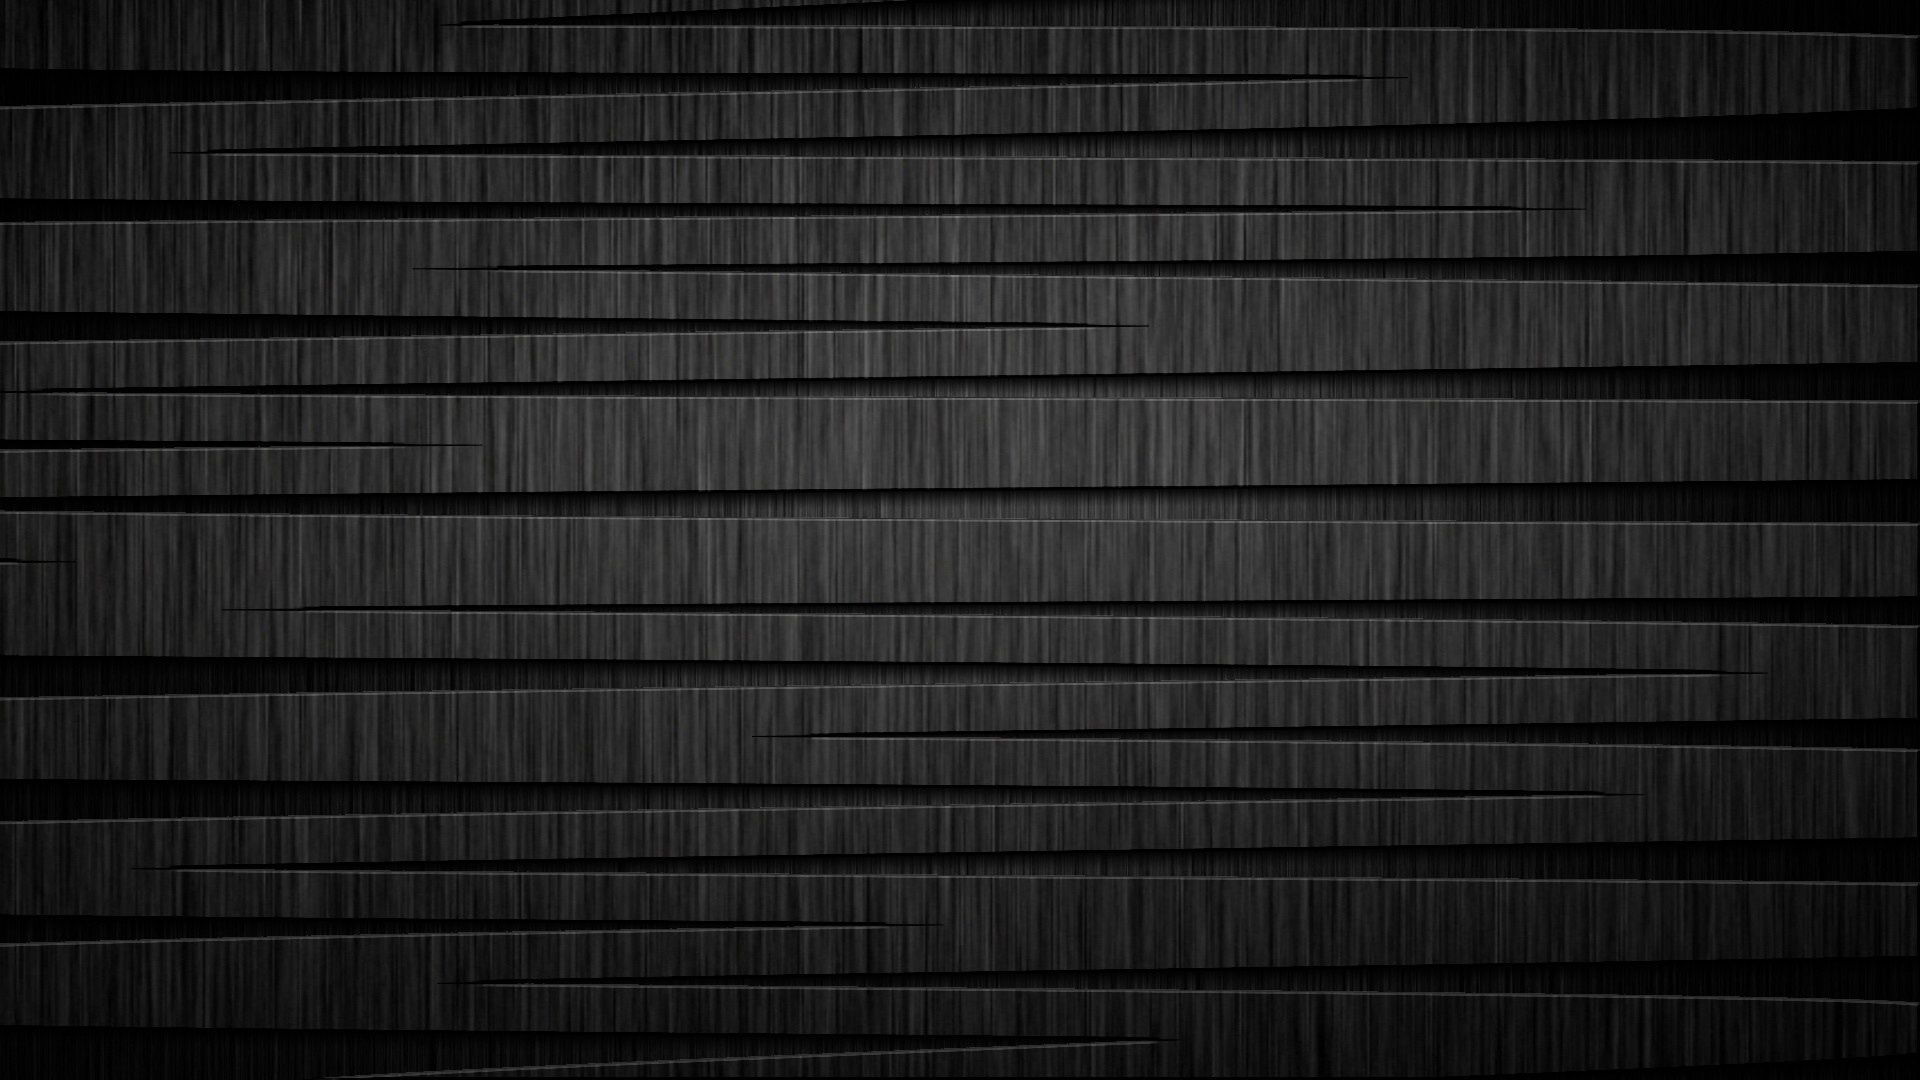 117295 download wallpaper texture, background, dark, lines, textures, irregularities screensavers and pictures for free